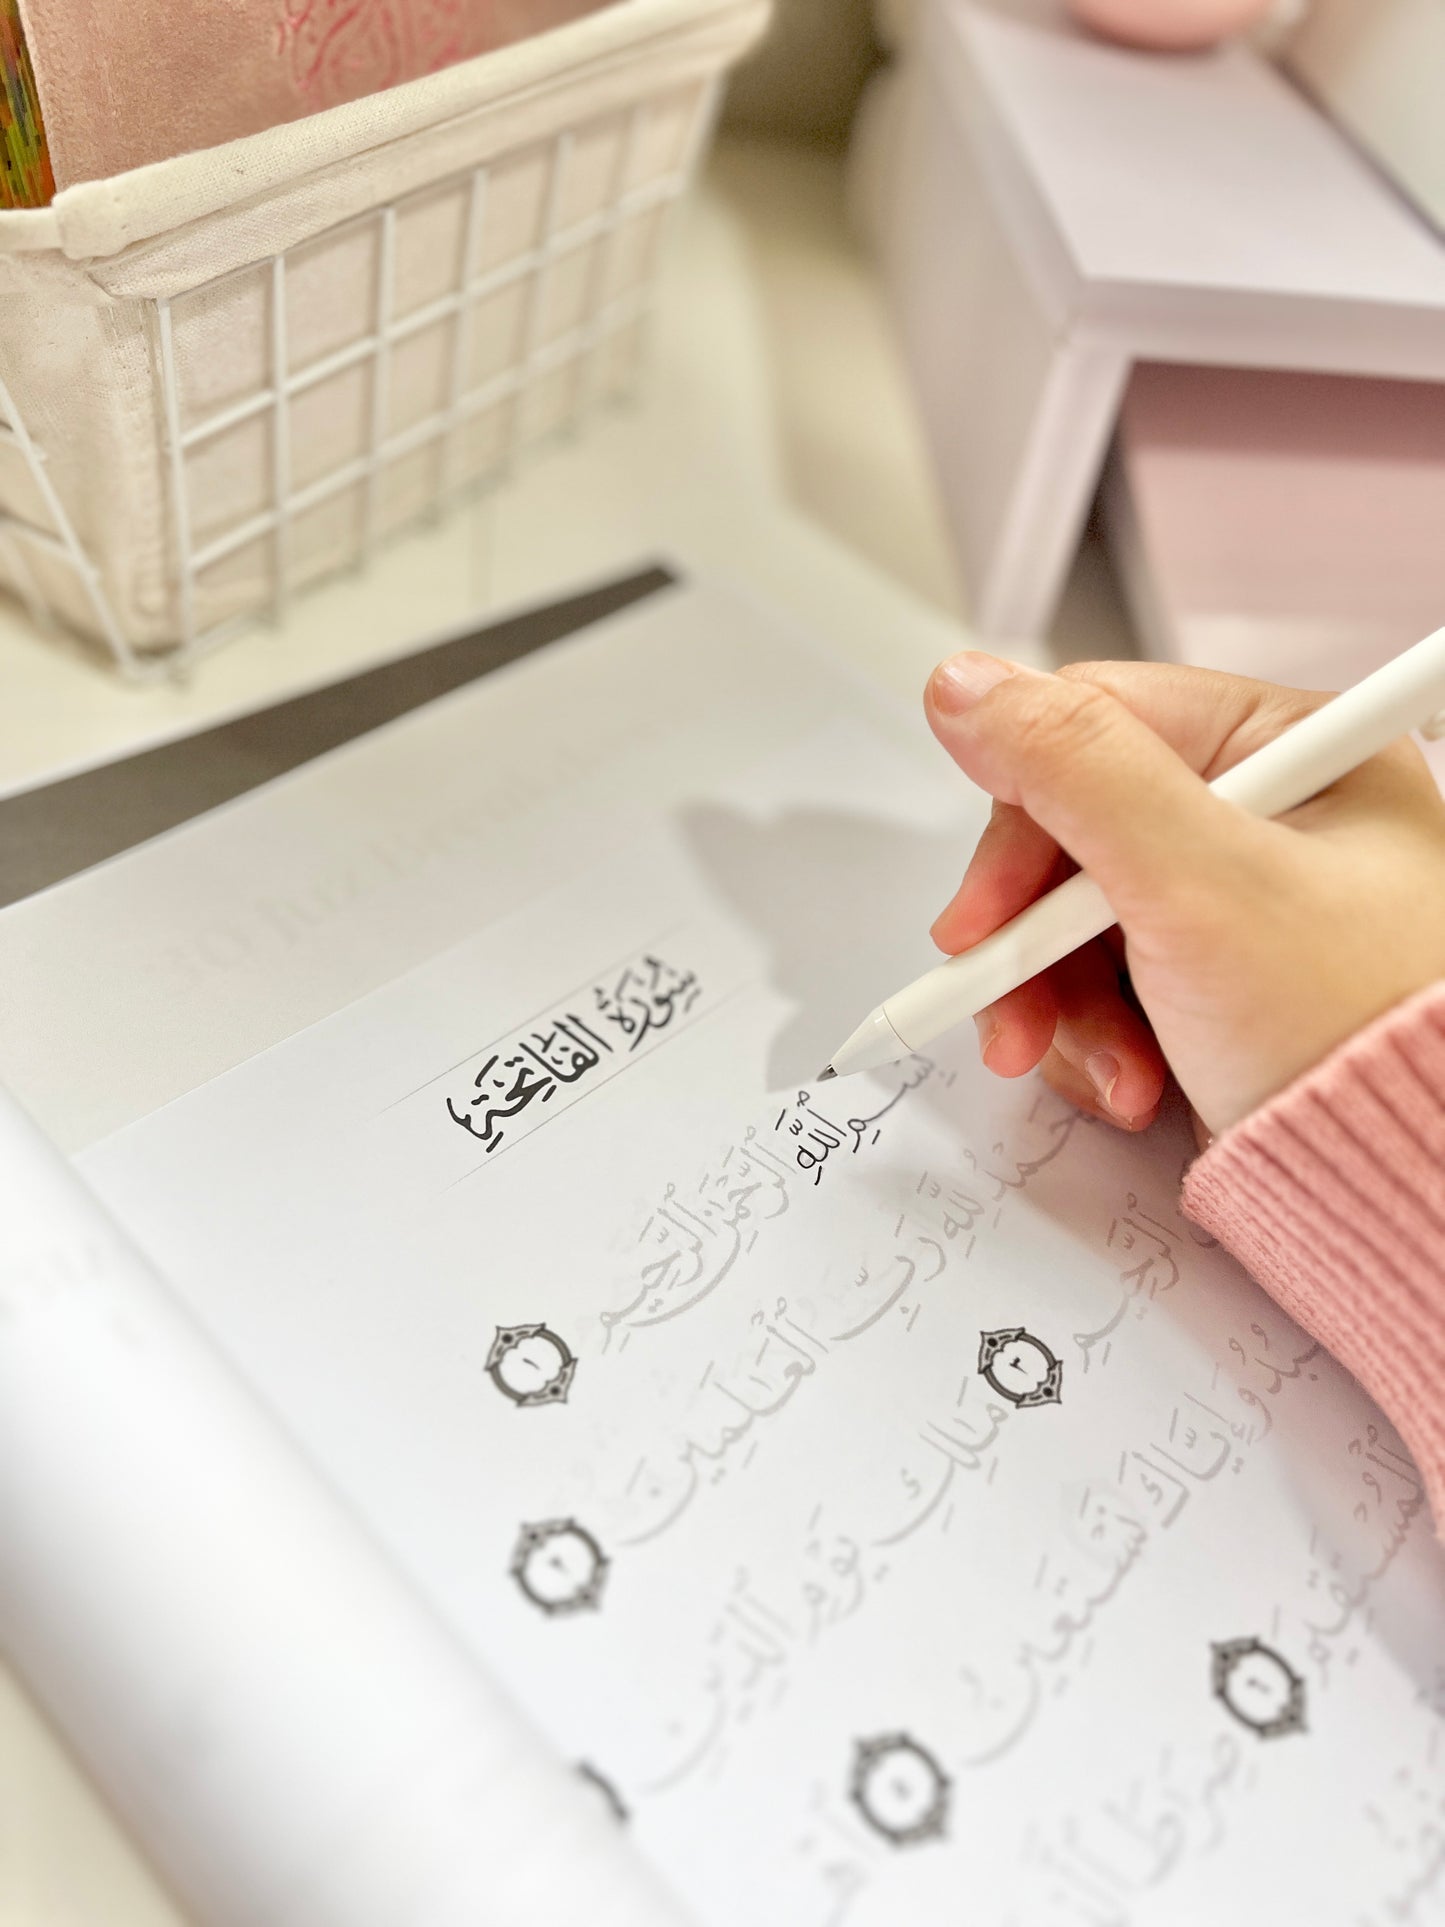 Quran tracing workbook is aesthetically designed to make tracing and reading the Qur’an easy.